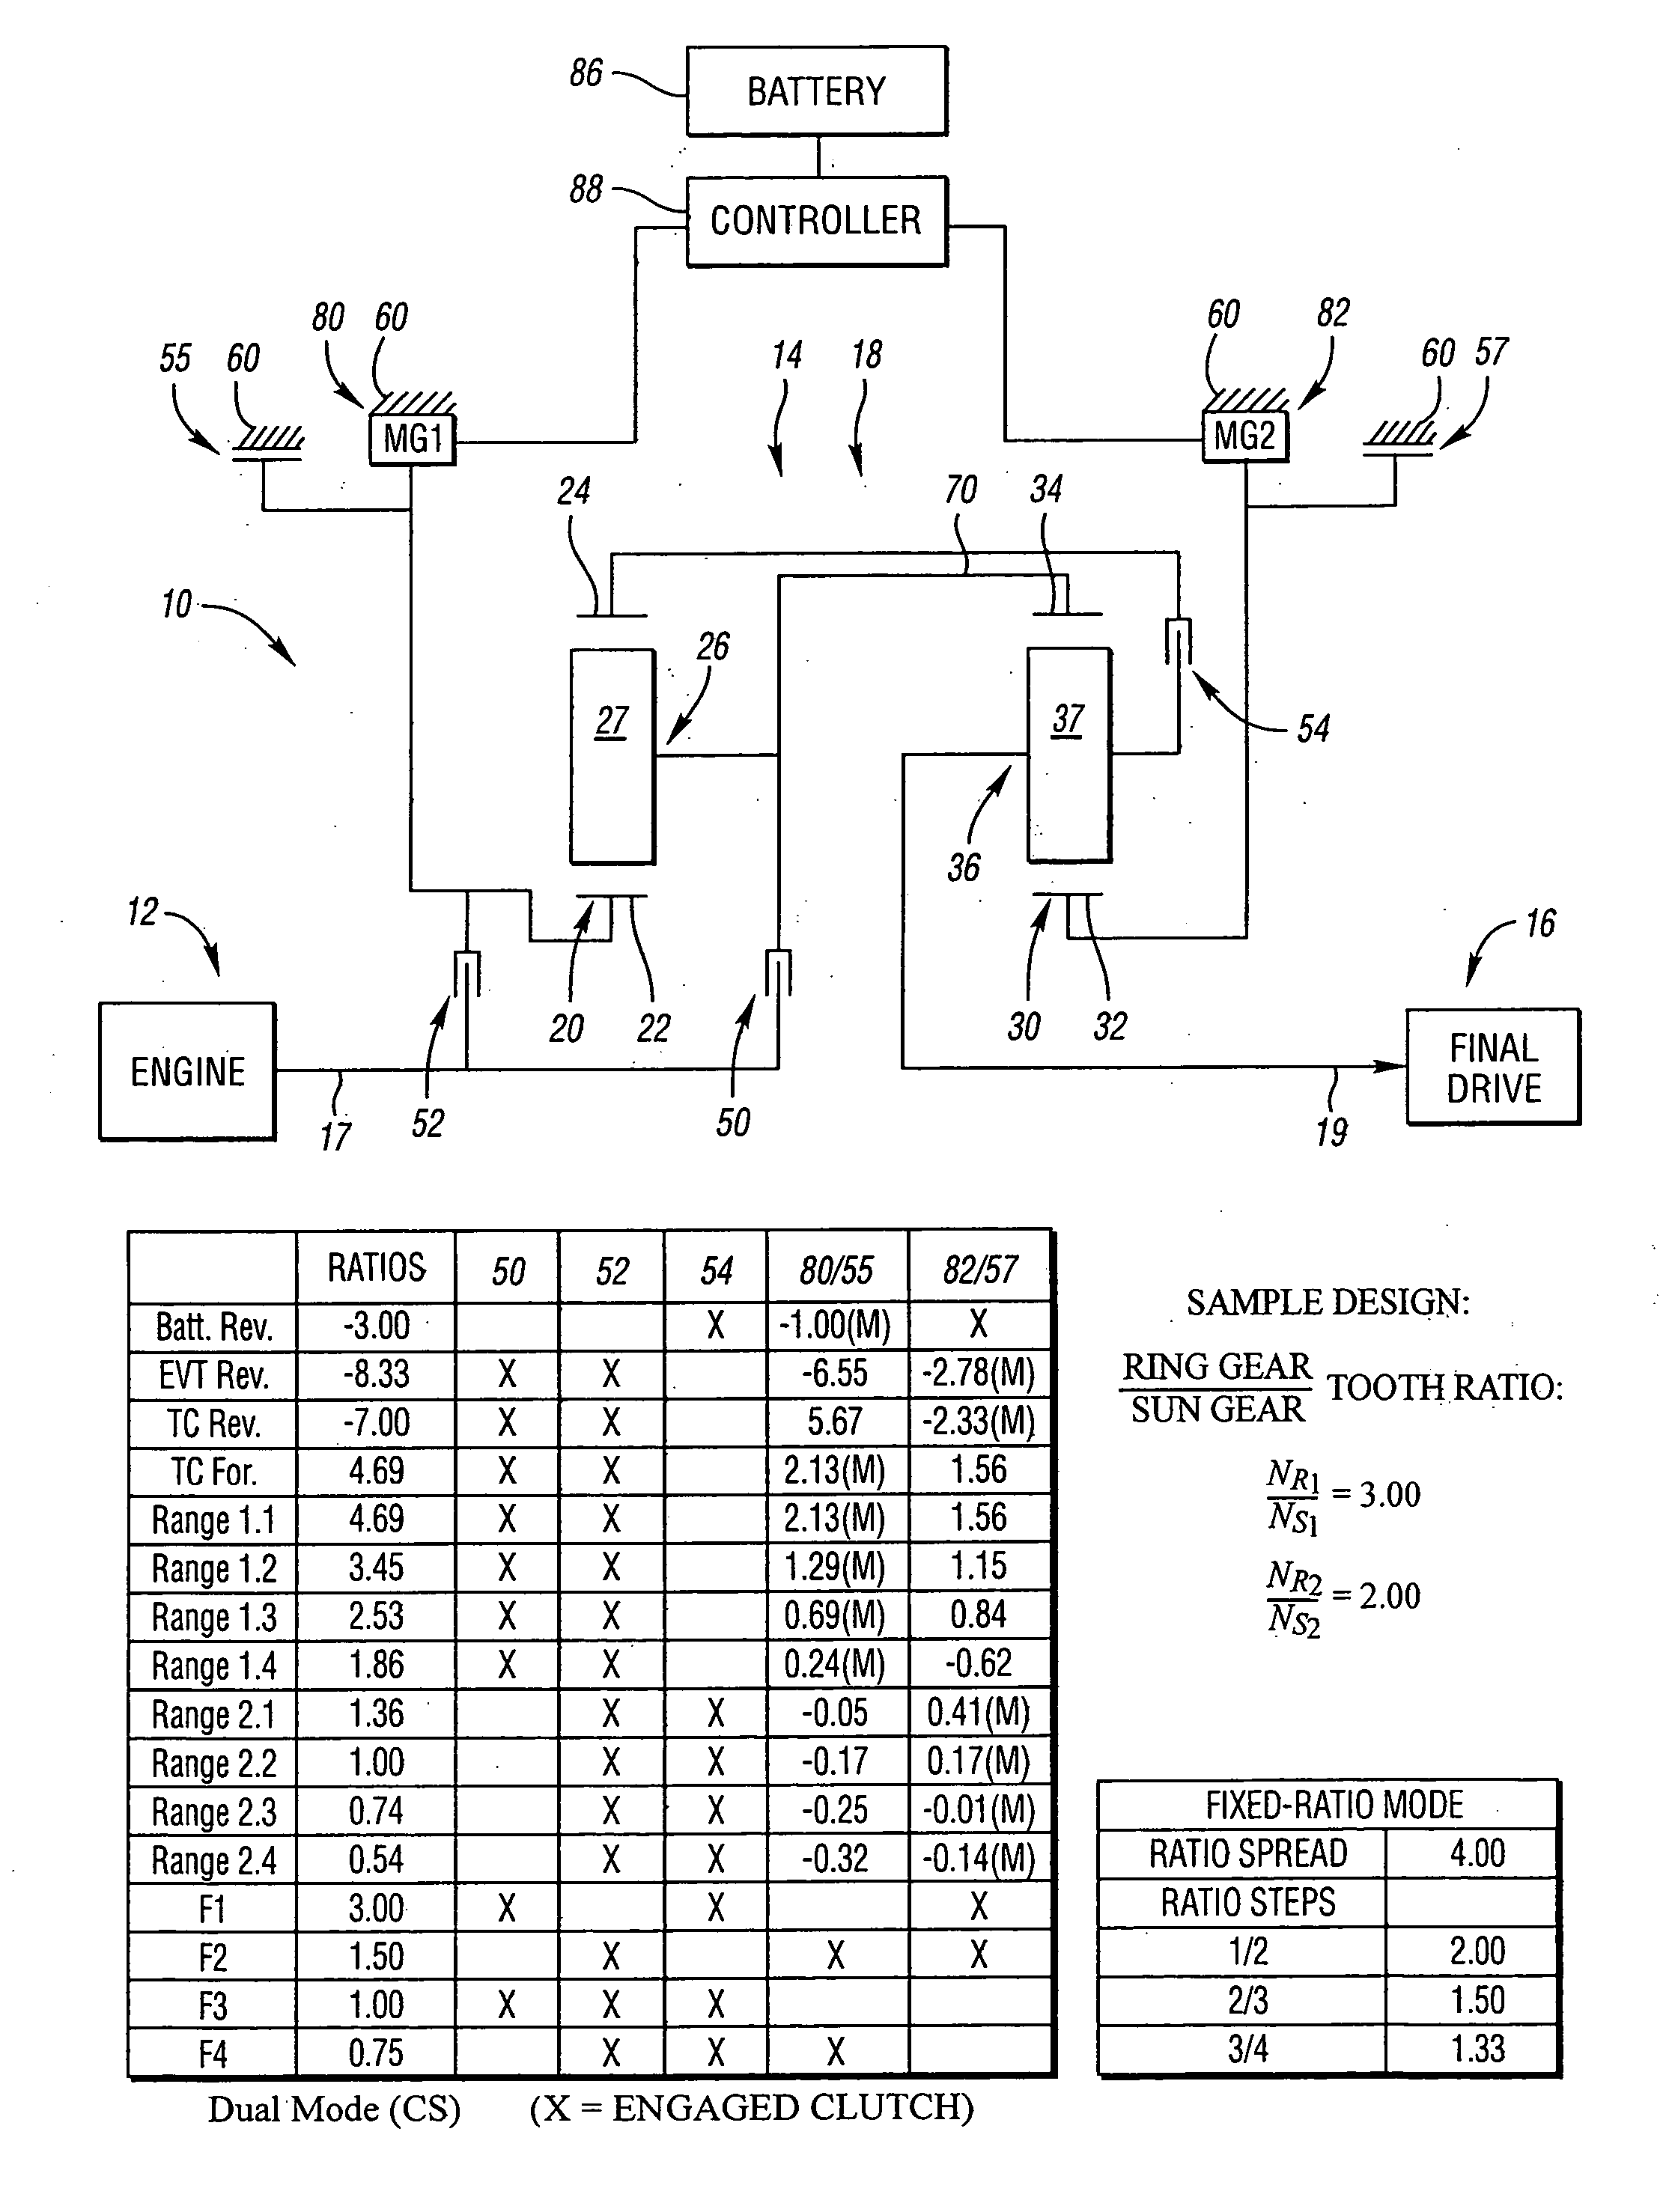 Electrically variable transmission having two planetary gear sets with one interconnecting member and clutched input